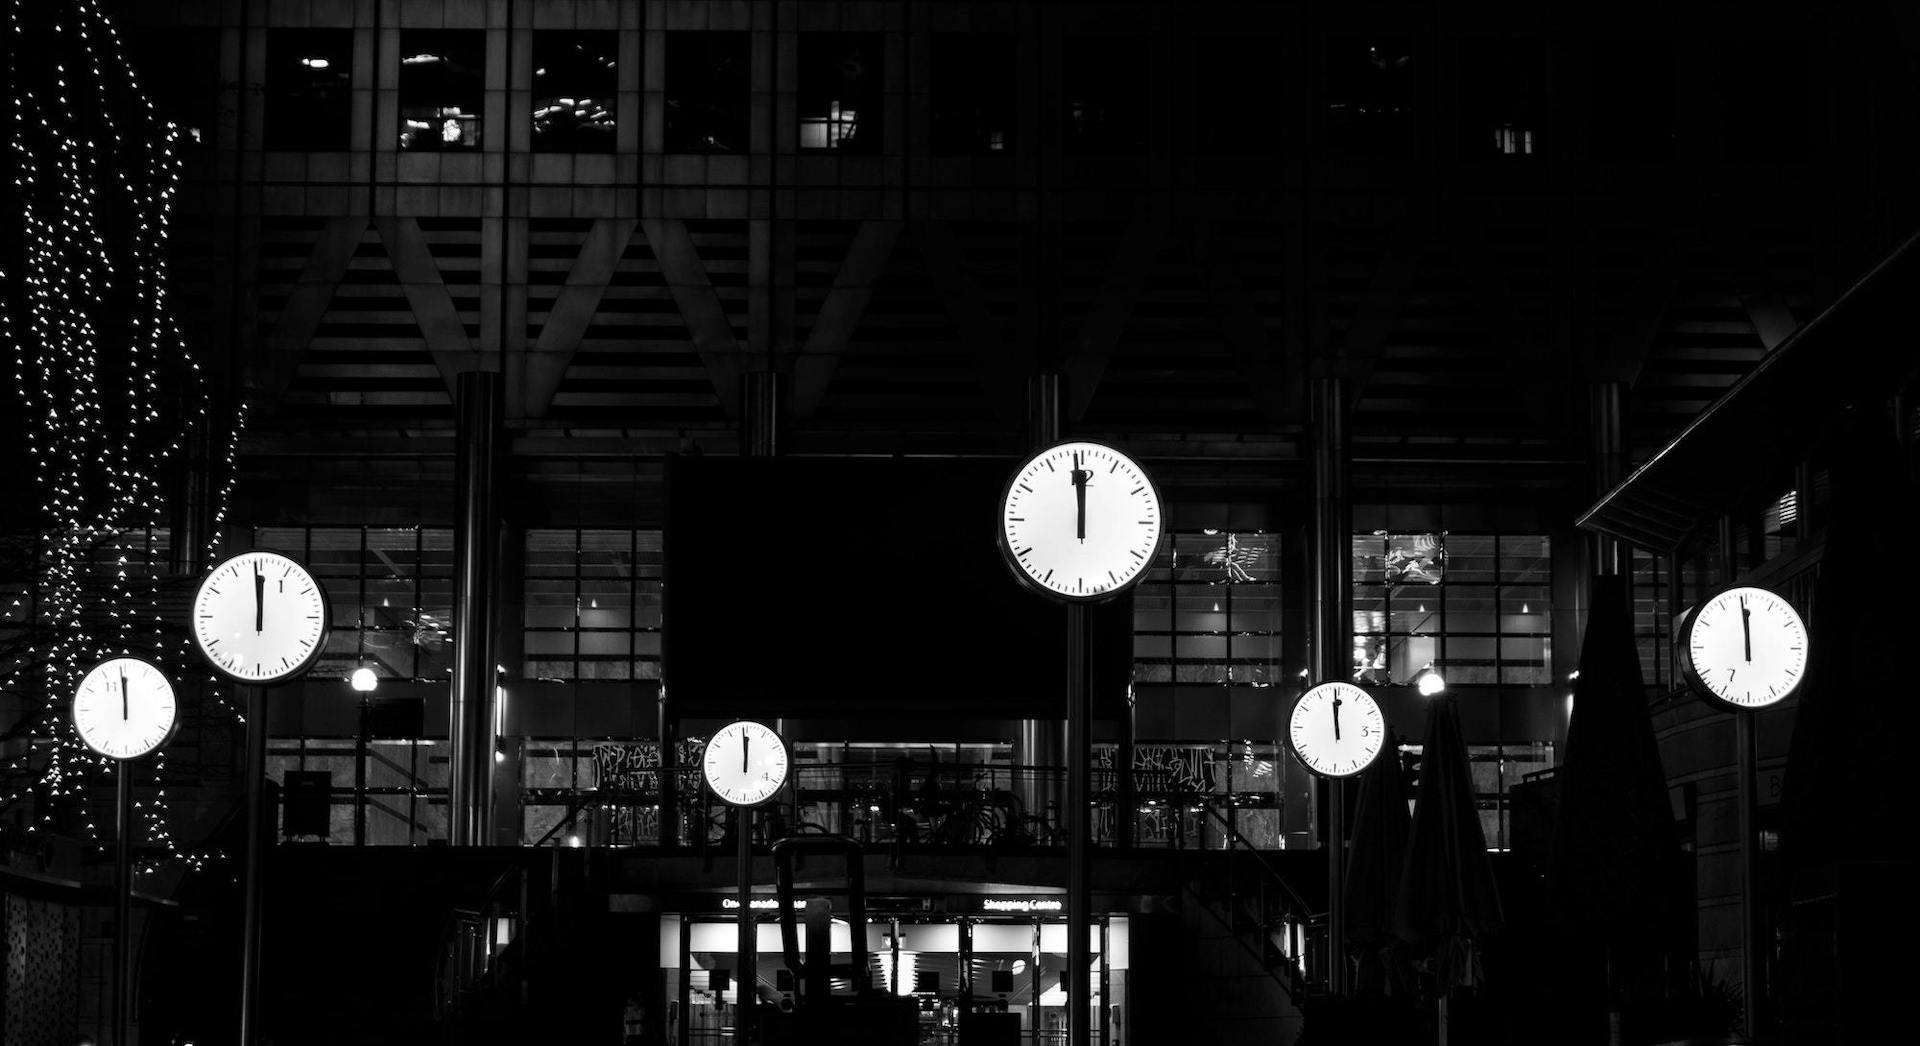 Black and white photograph showing multiple clocks glowing at night.